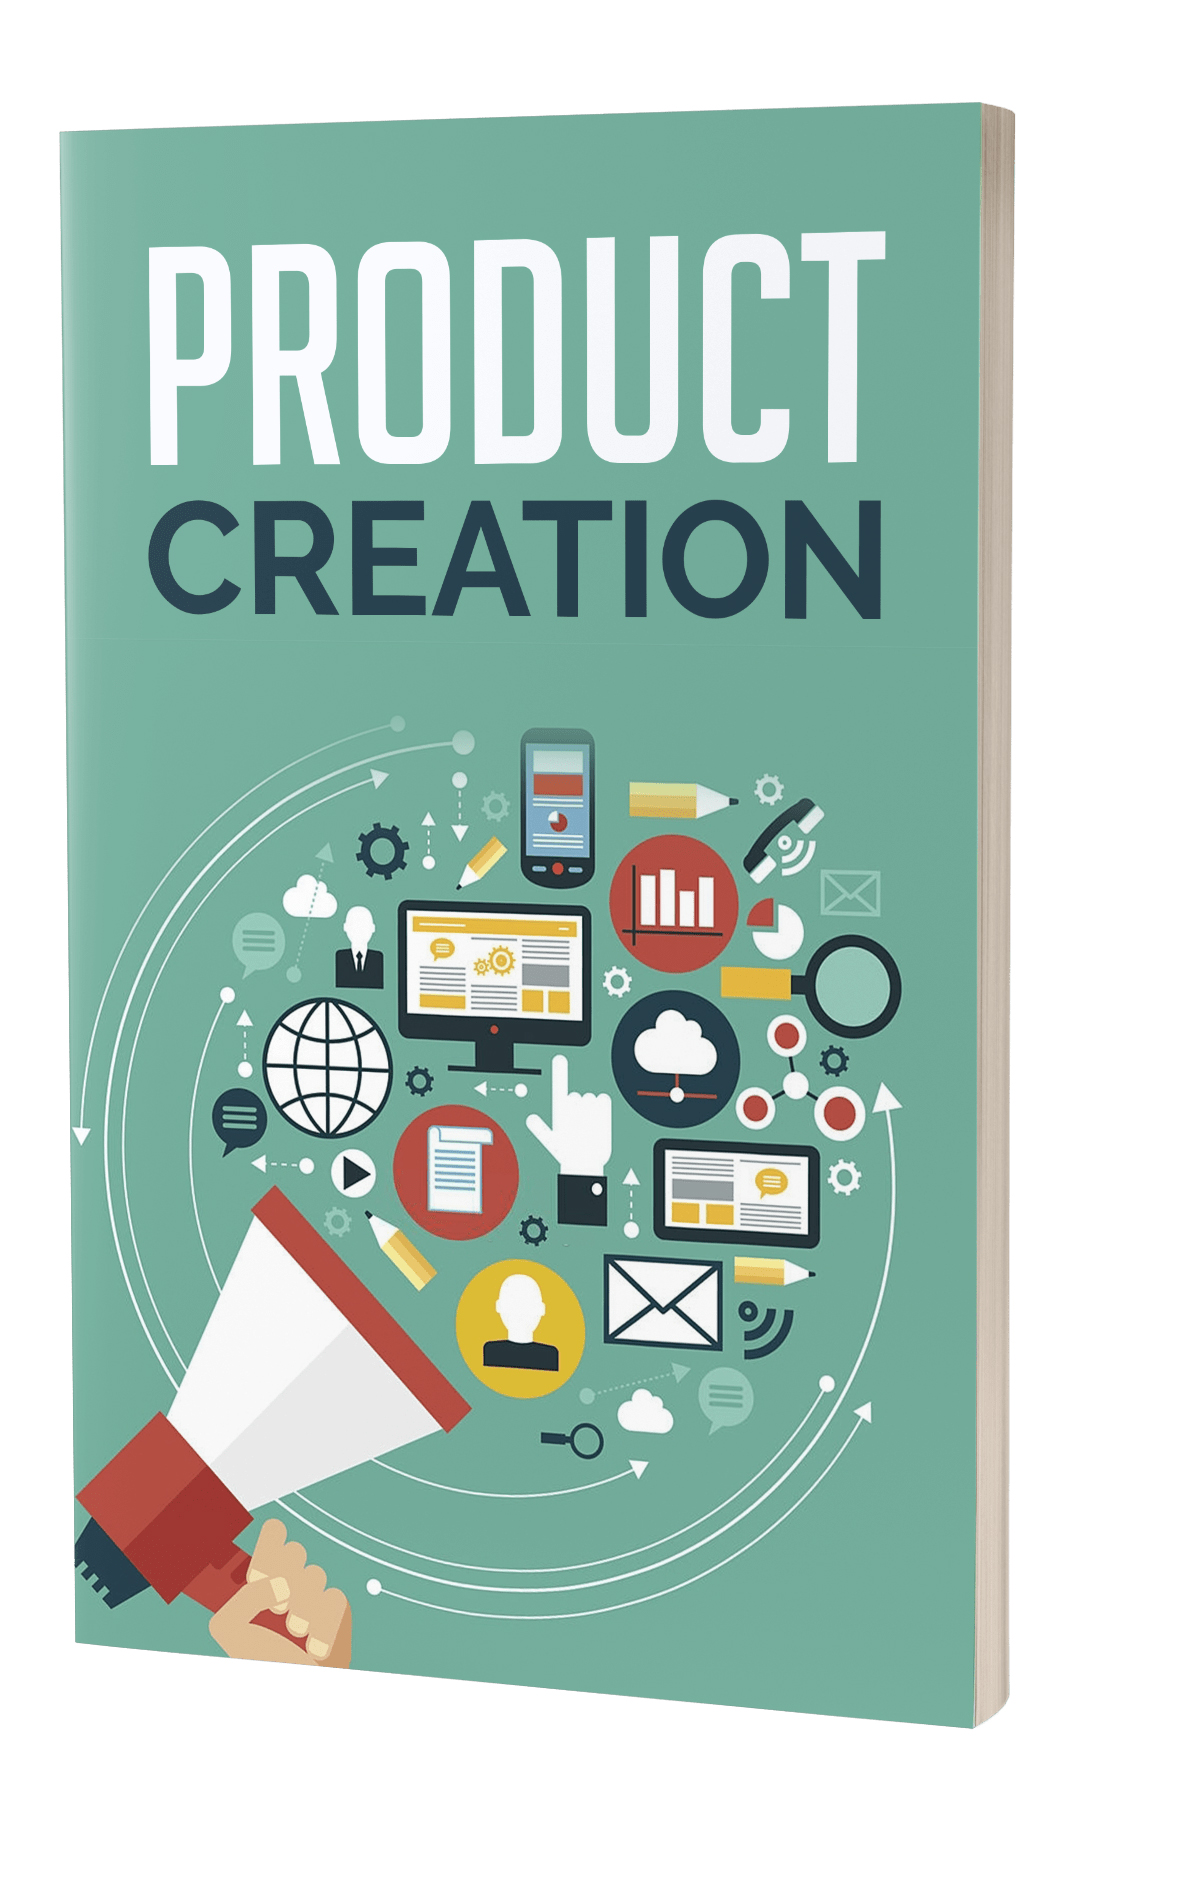 Product Creation – 25 minutes